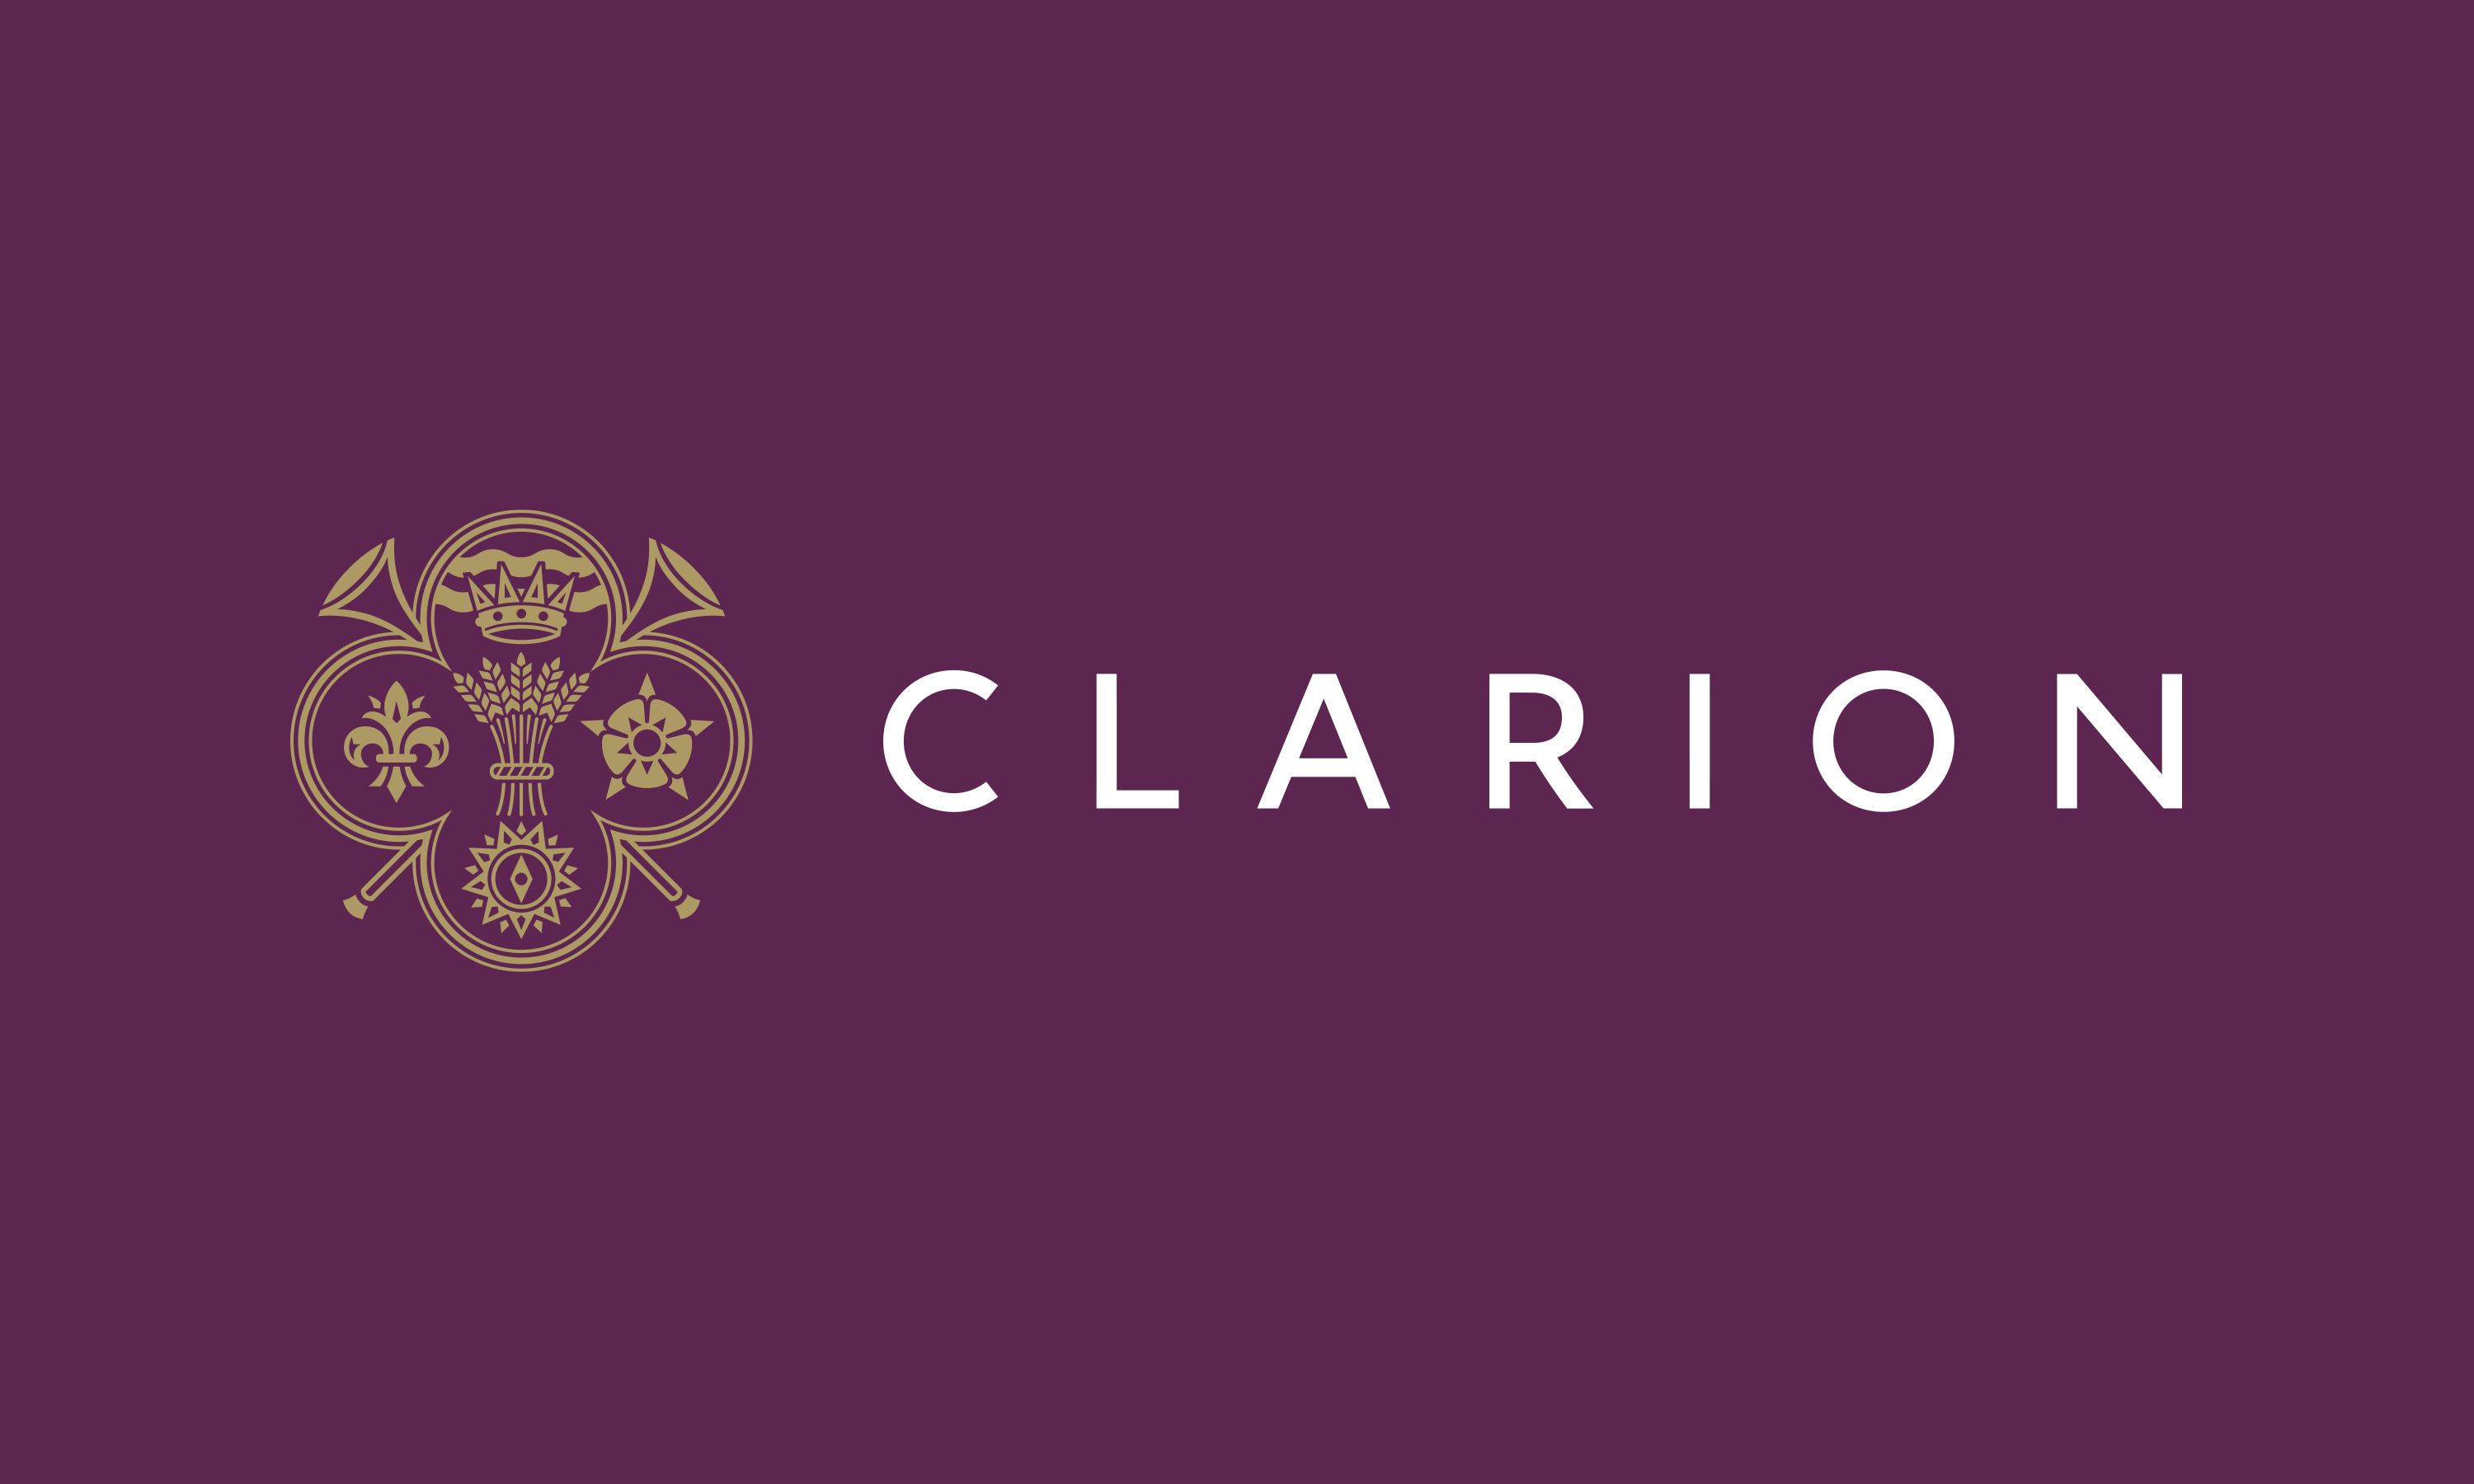 Branding by Neon - Clarion Wealth Management branding - Financial services branding - Clarion logo on royal purple designed by Dana Robertson